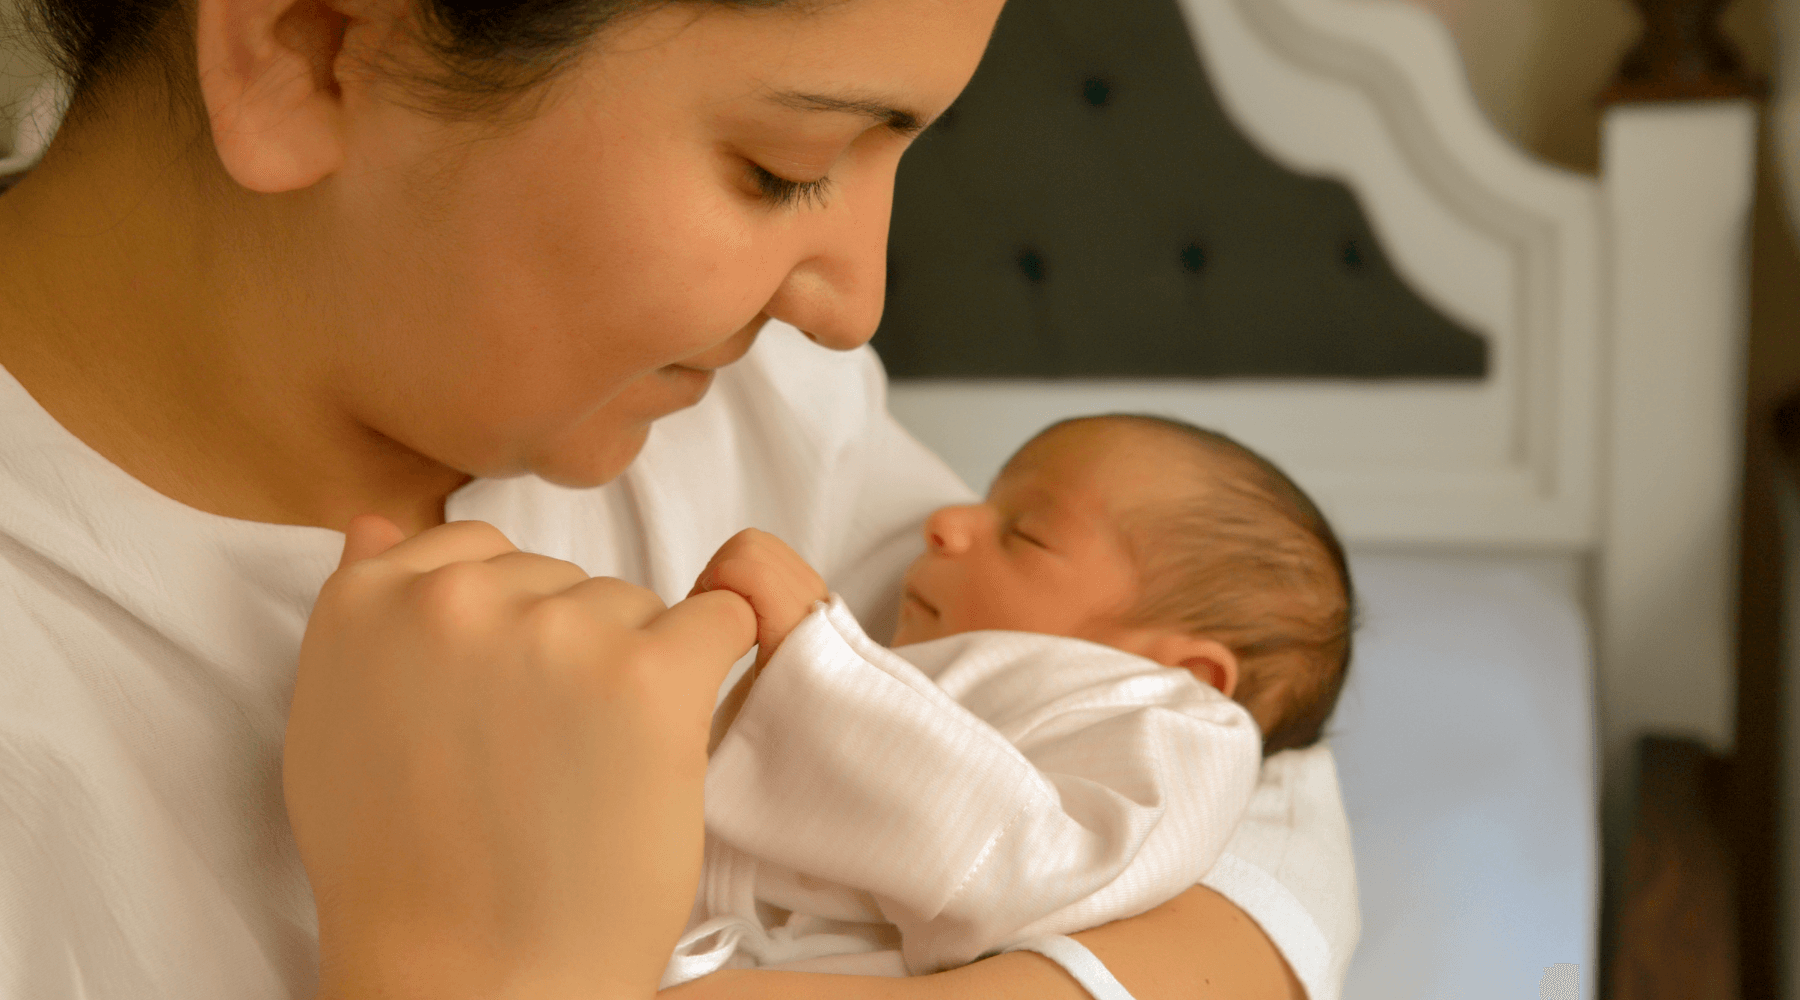 QUESTIONS ABOUT CHILDBIRTH? LOVEMERE